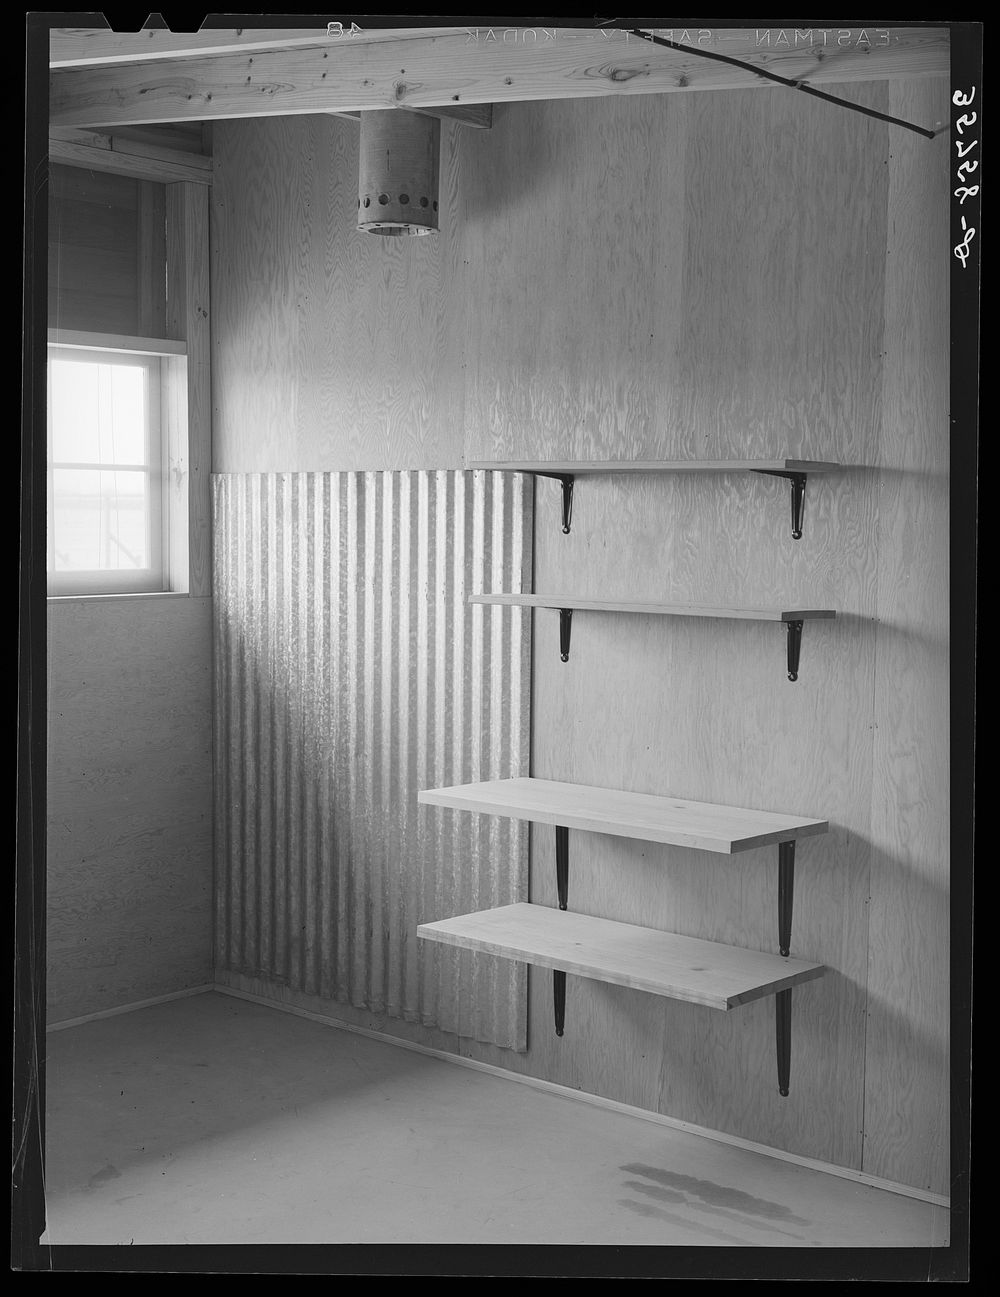 Shelves which will serve as storage space for kitchen equipment in one of the row shelters for migratory workers at the…